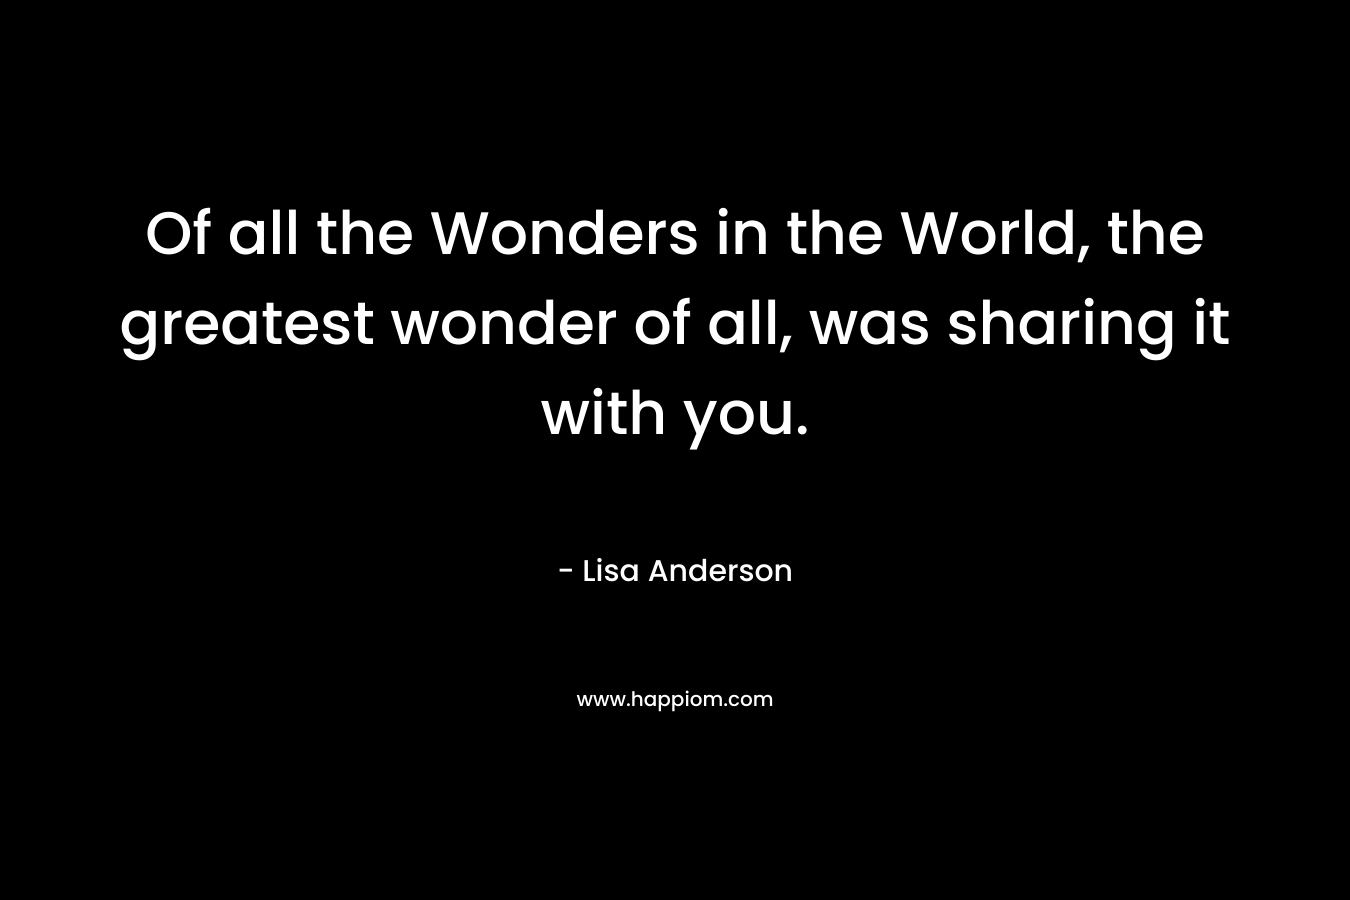 Of all the Wonders in the World, the greatest wonder of all, was sharing it with you.